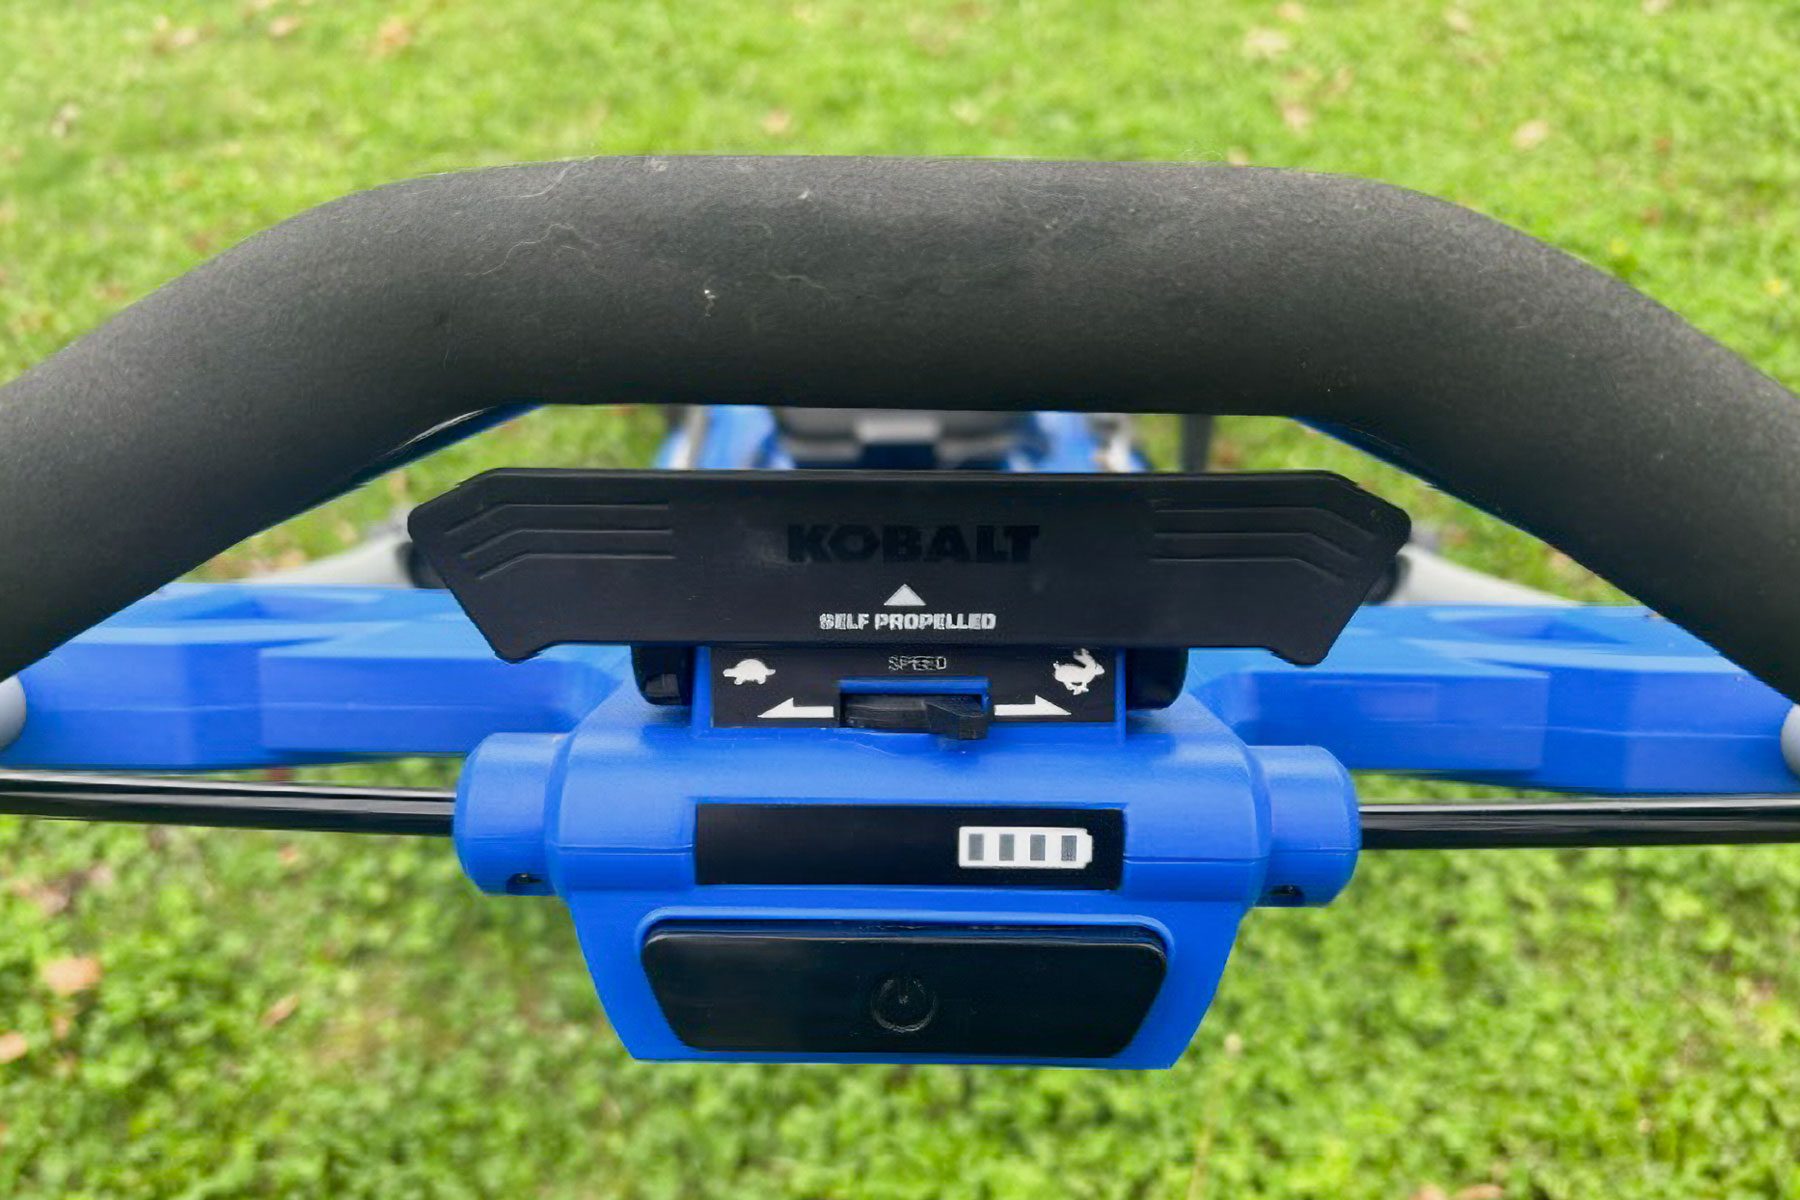 Close up of the back side of Kolbalt Electric Mower